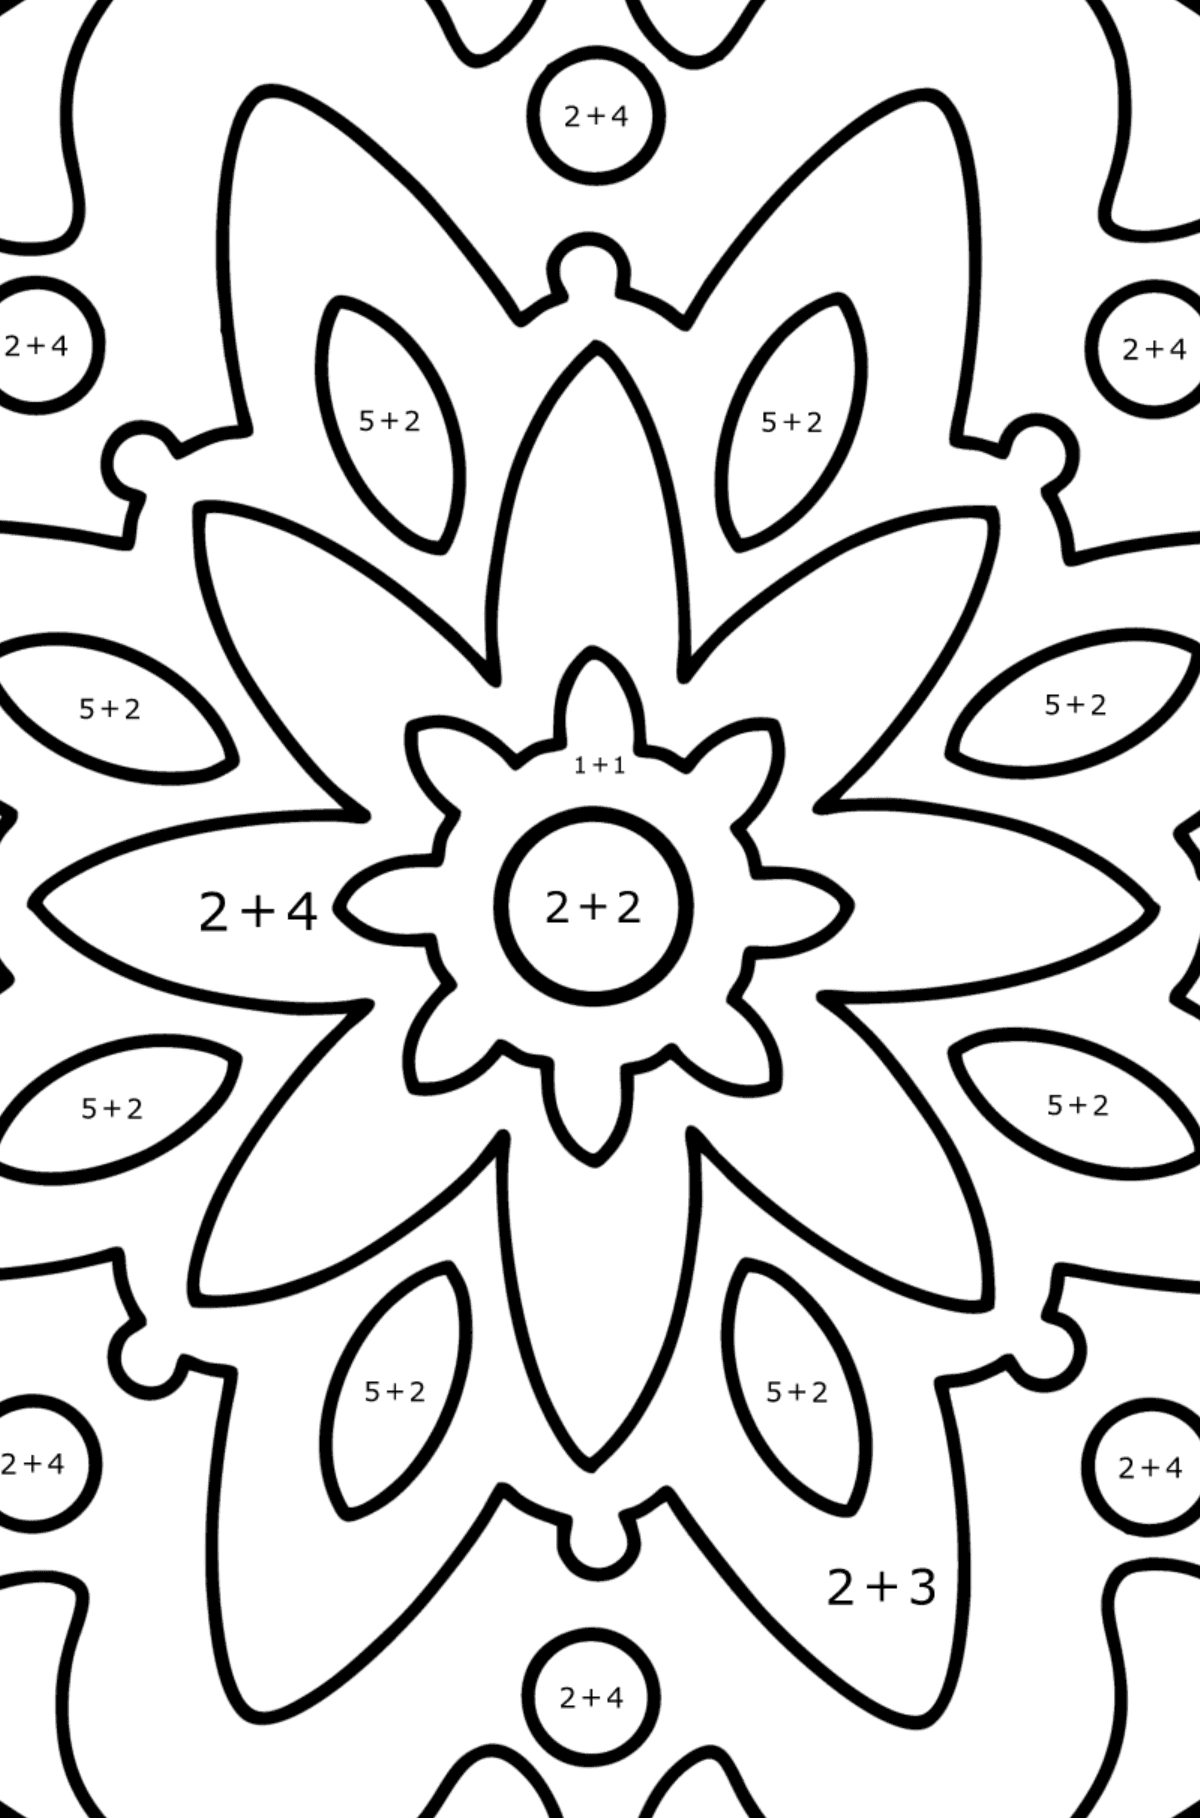 Mandala coloring page - 22 elements - Math Coloring - Addition for Kids